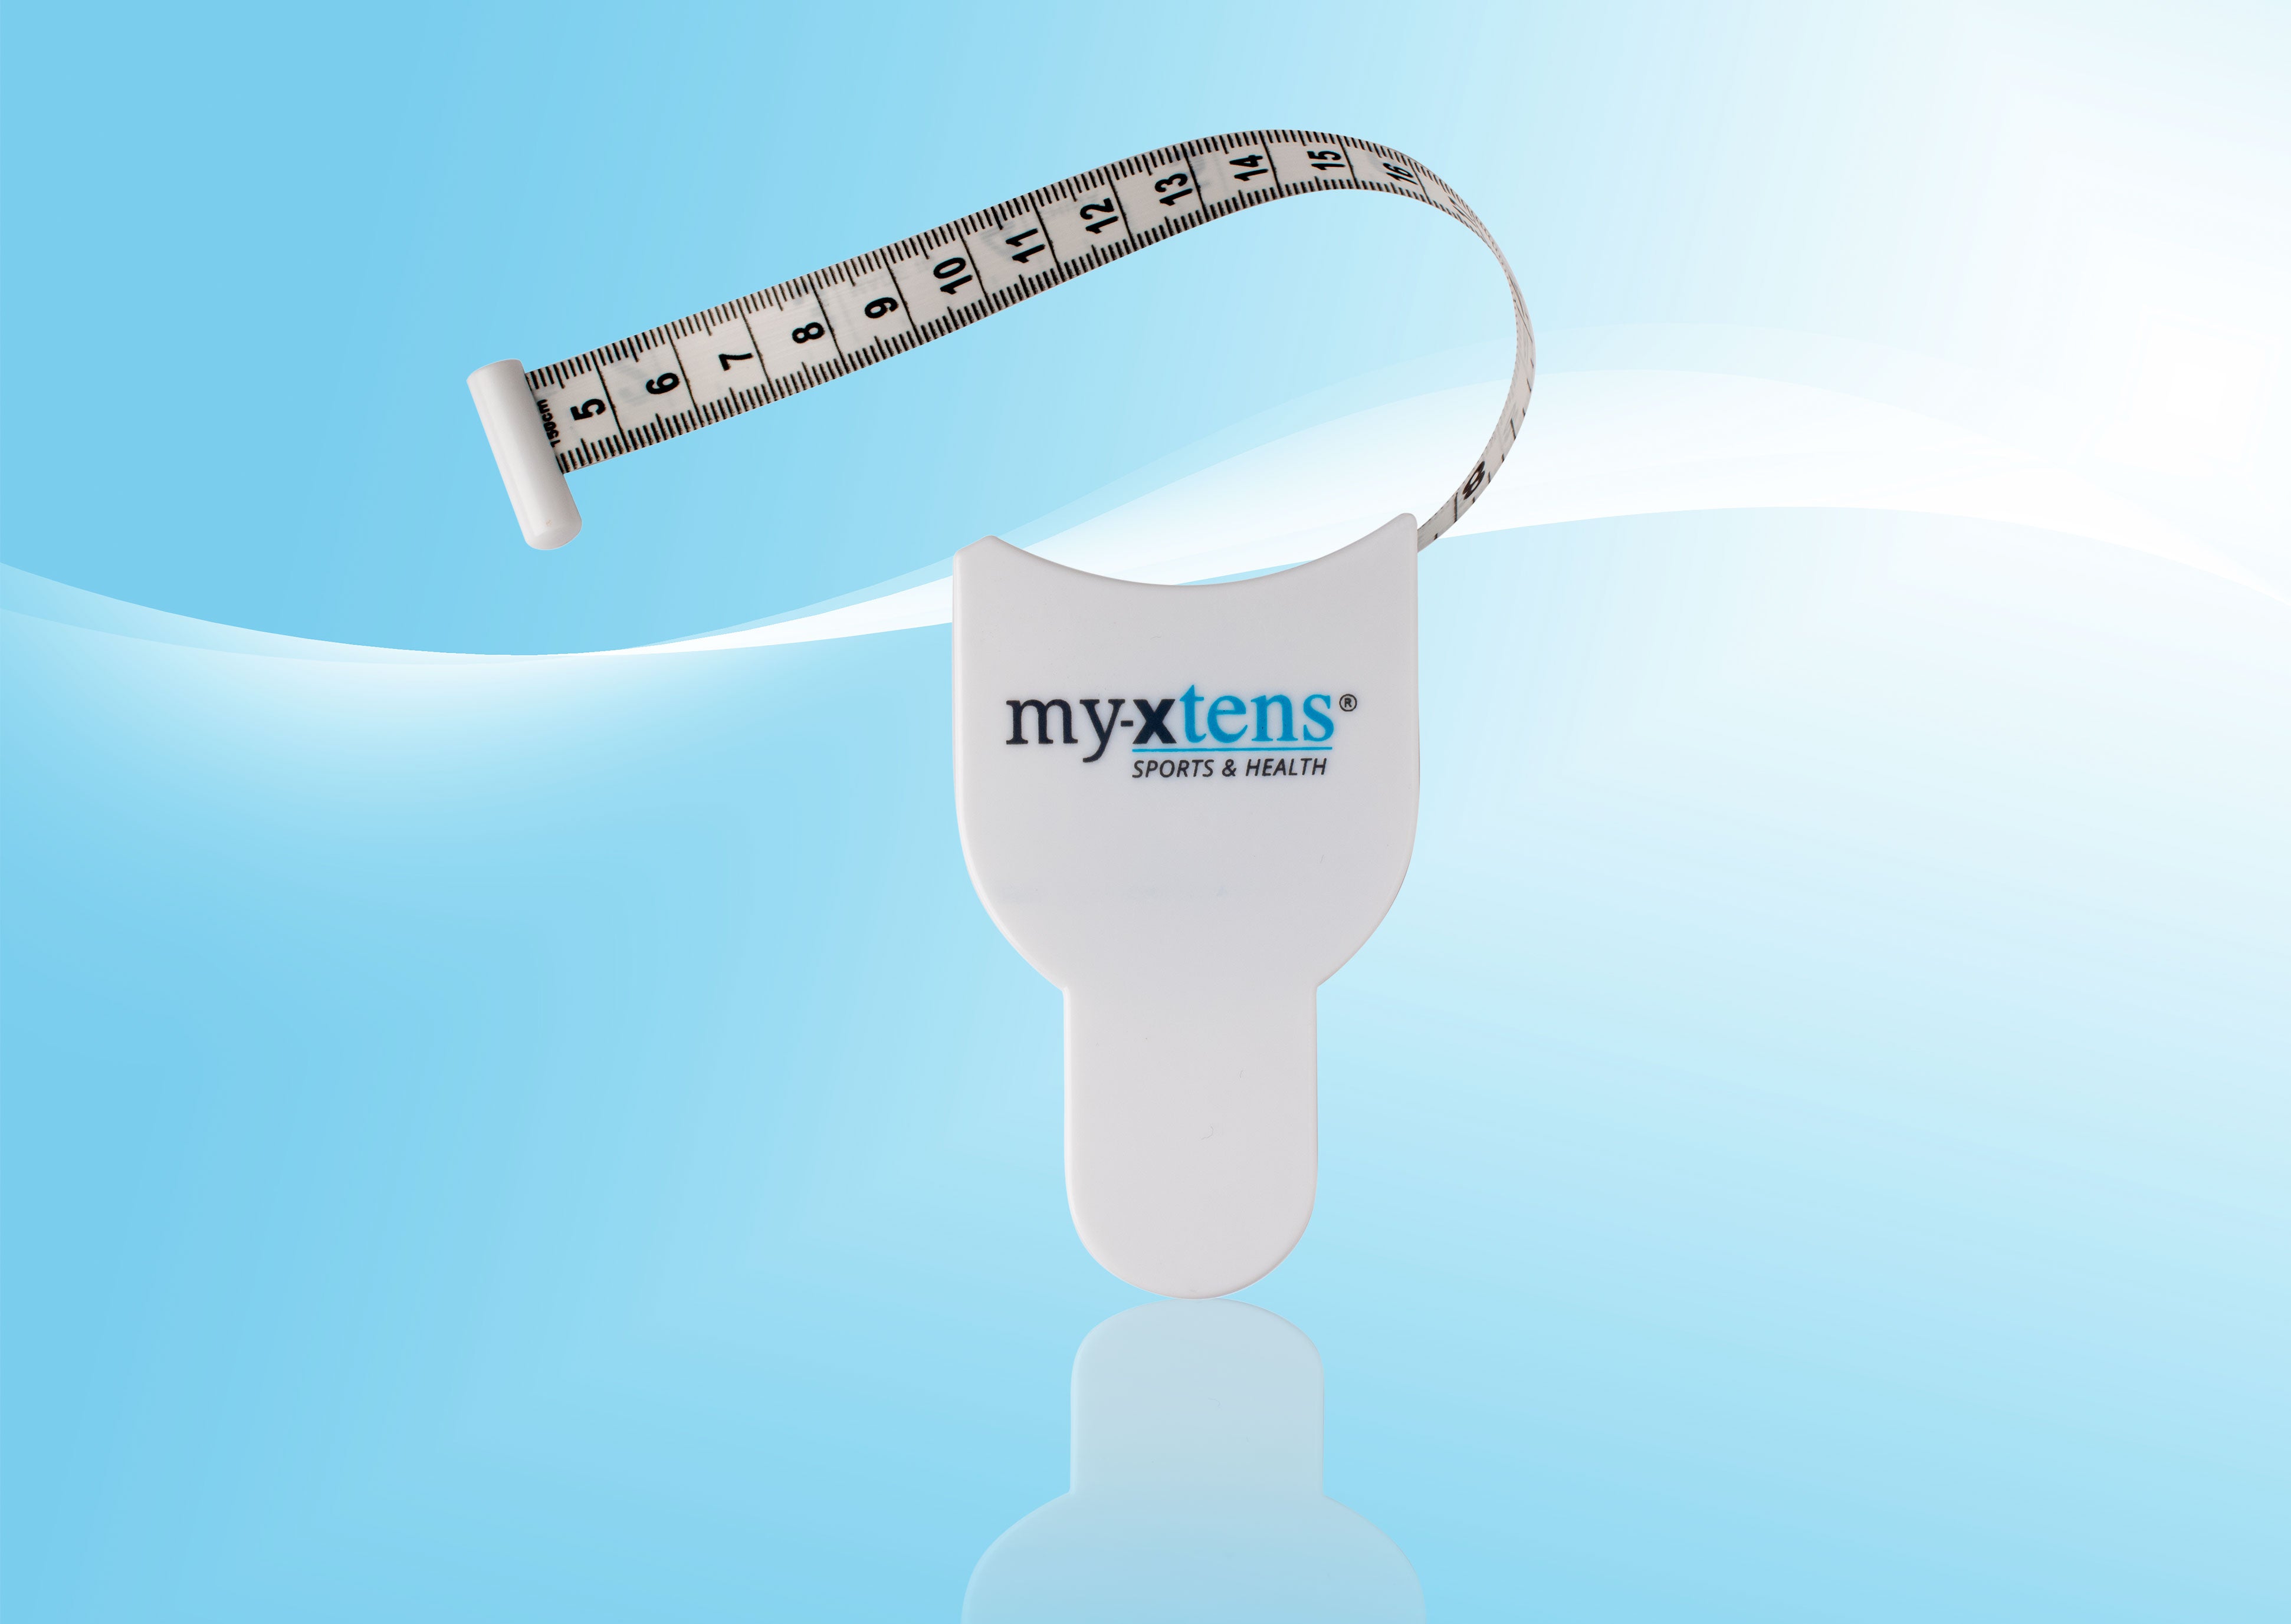 my-xtens MEASURING TAPE - Simple & accurate!